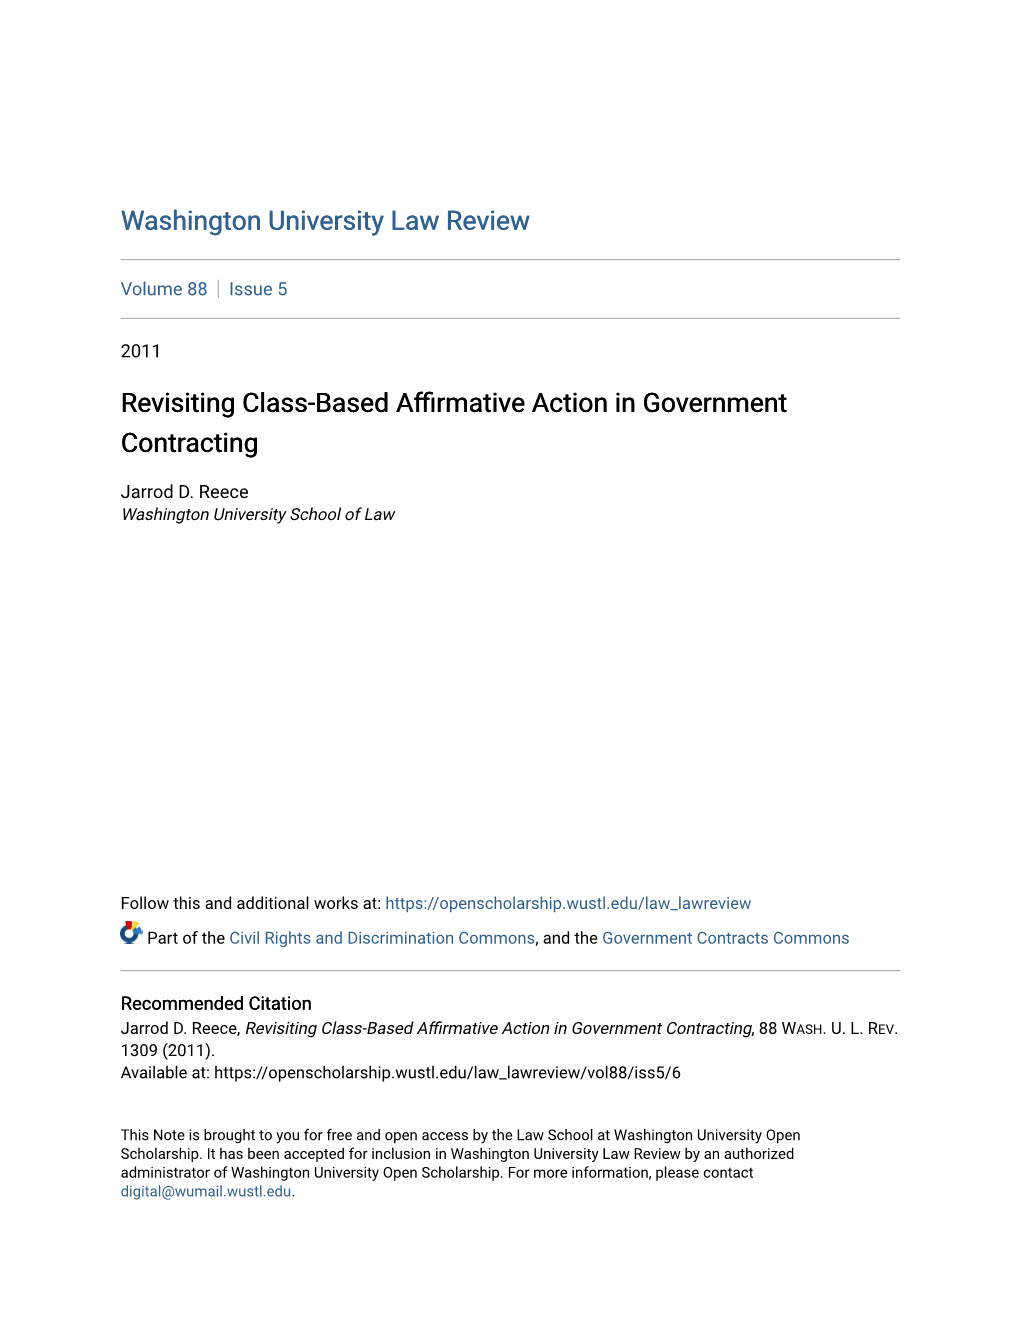 Revisiting Class-Based Affirmative Action in Government Contracting